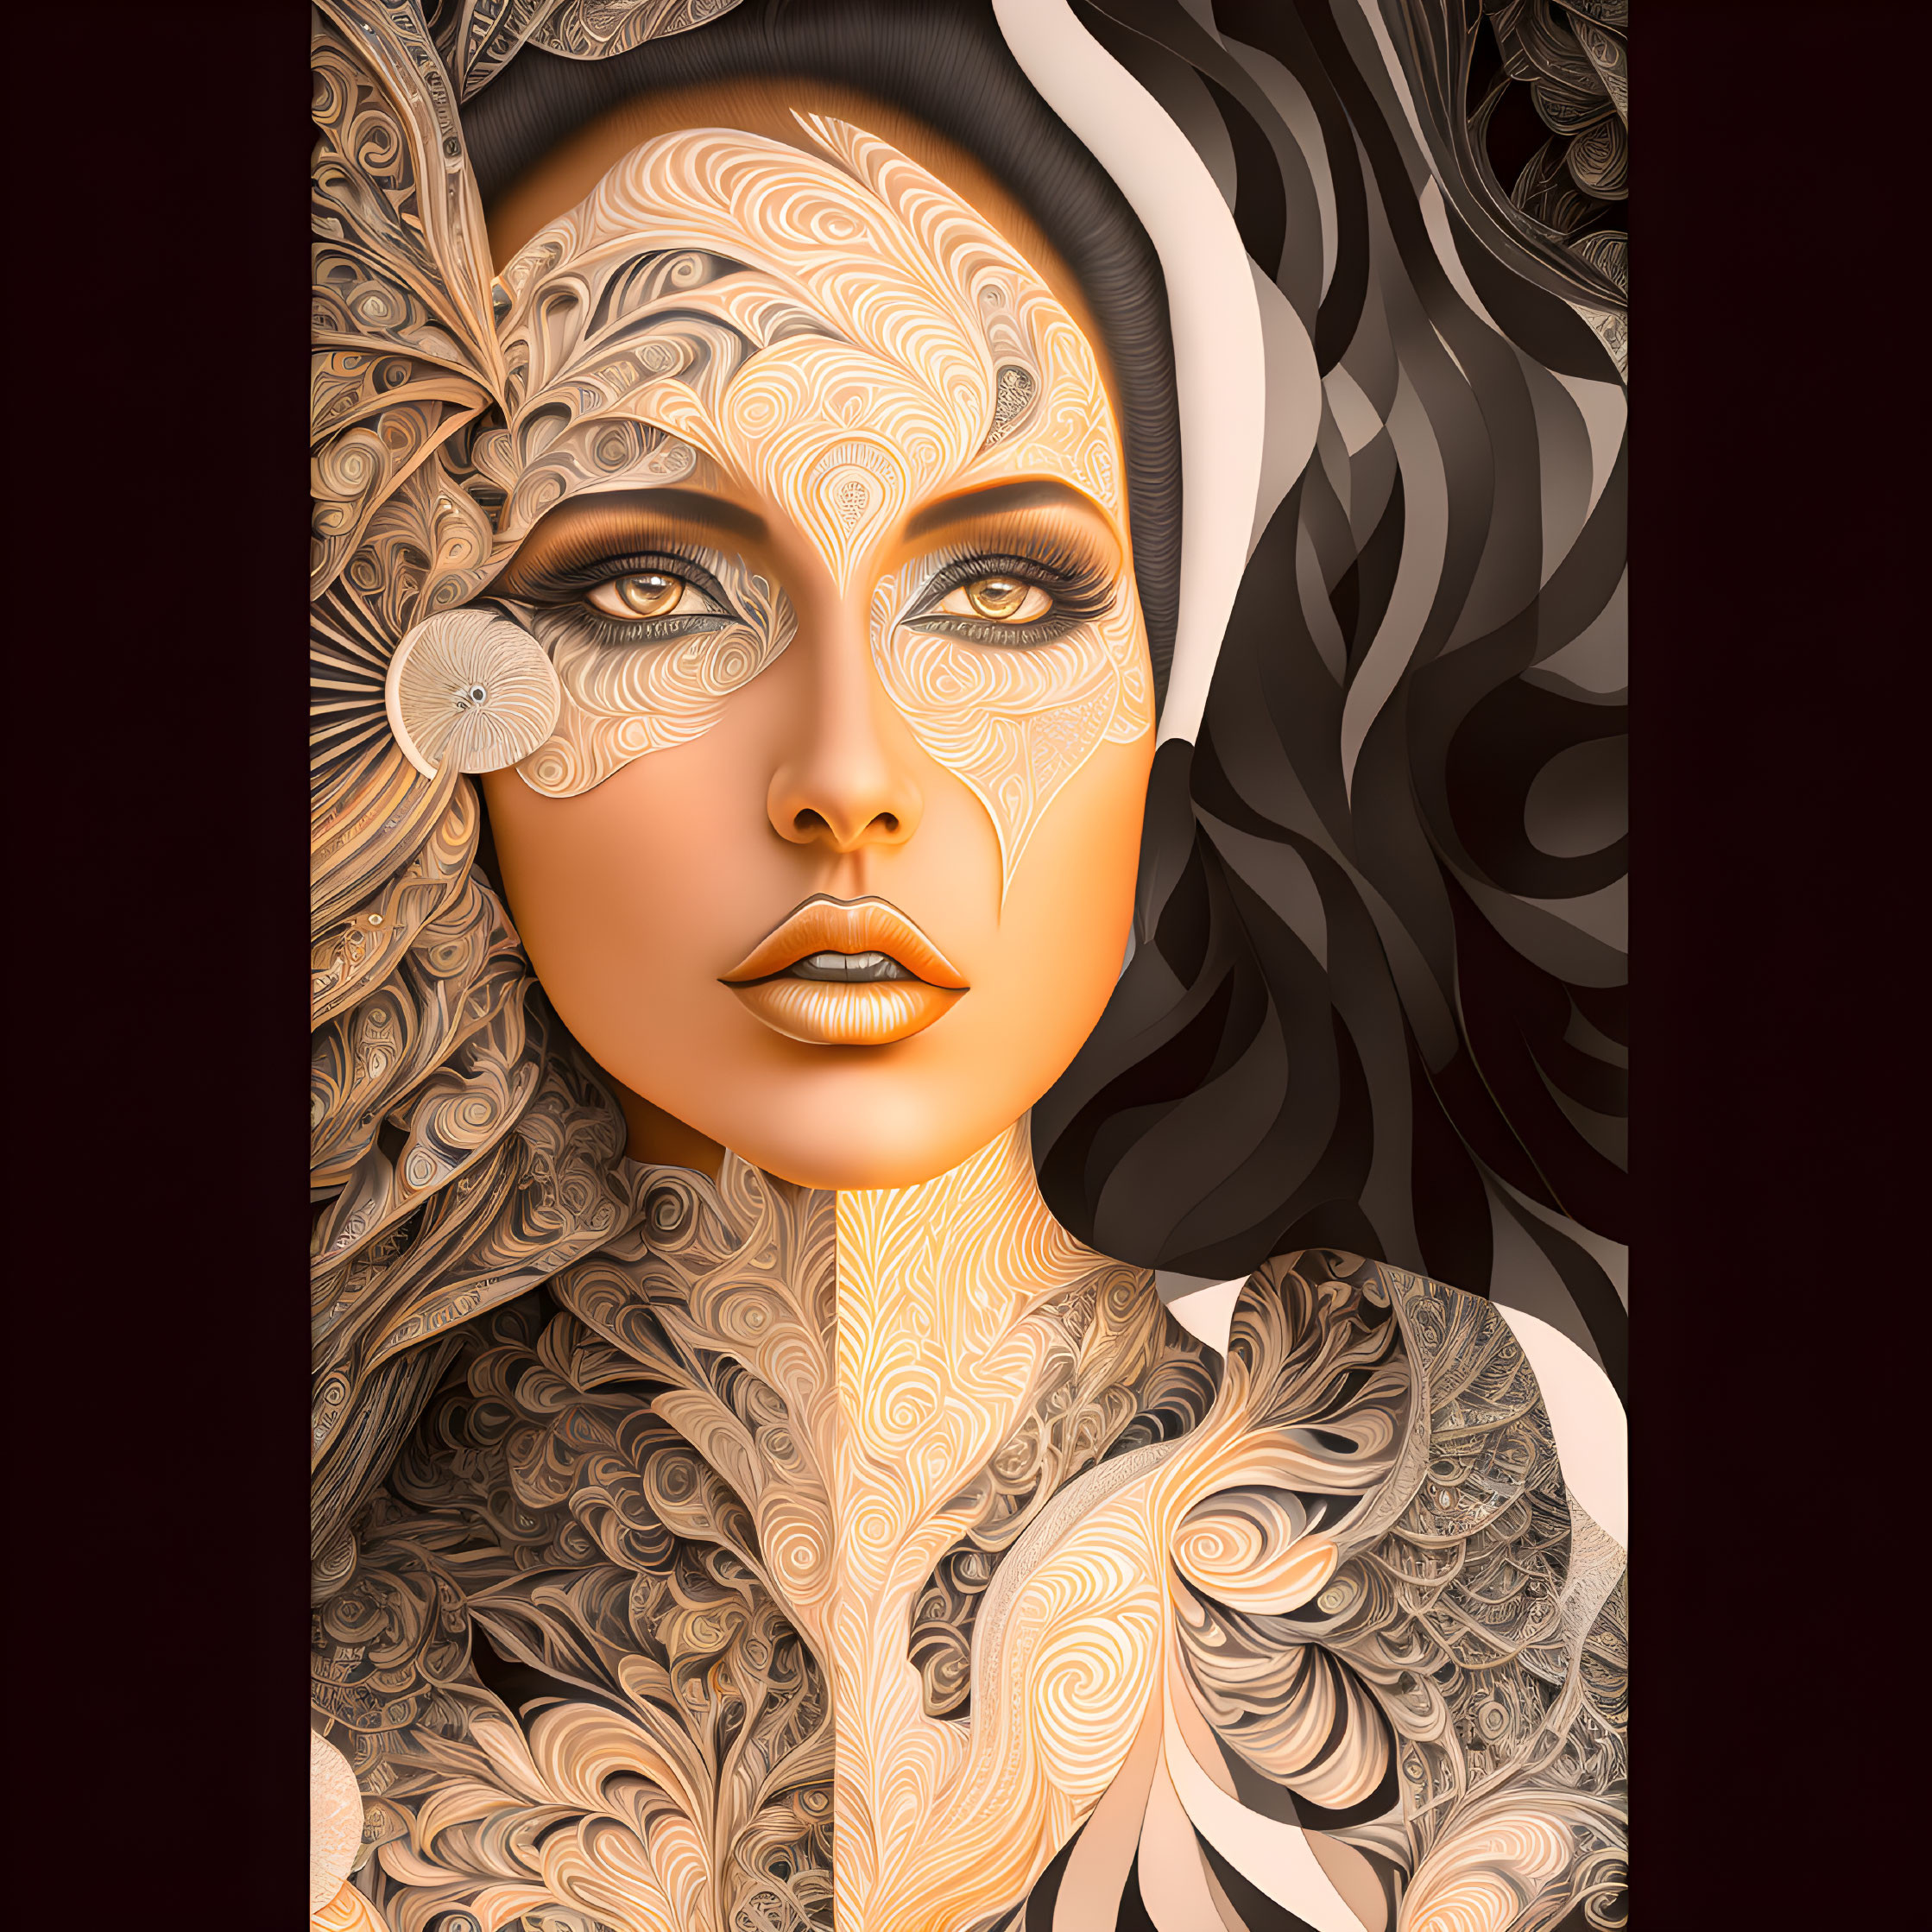 Detailed digital artwork of woman's face with intricate skin patterns and dandelion motif